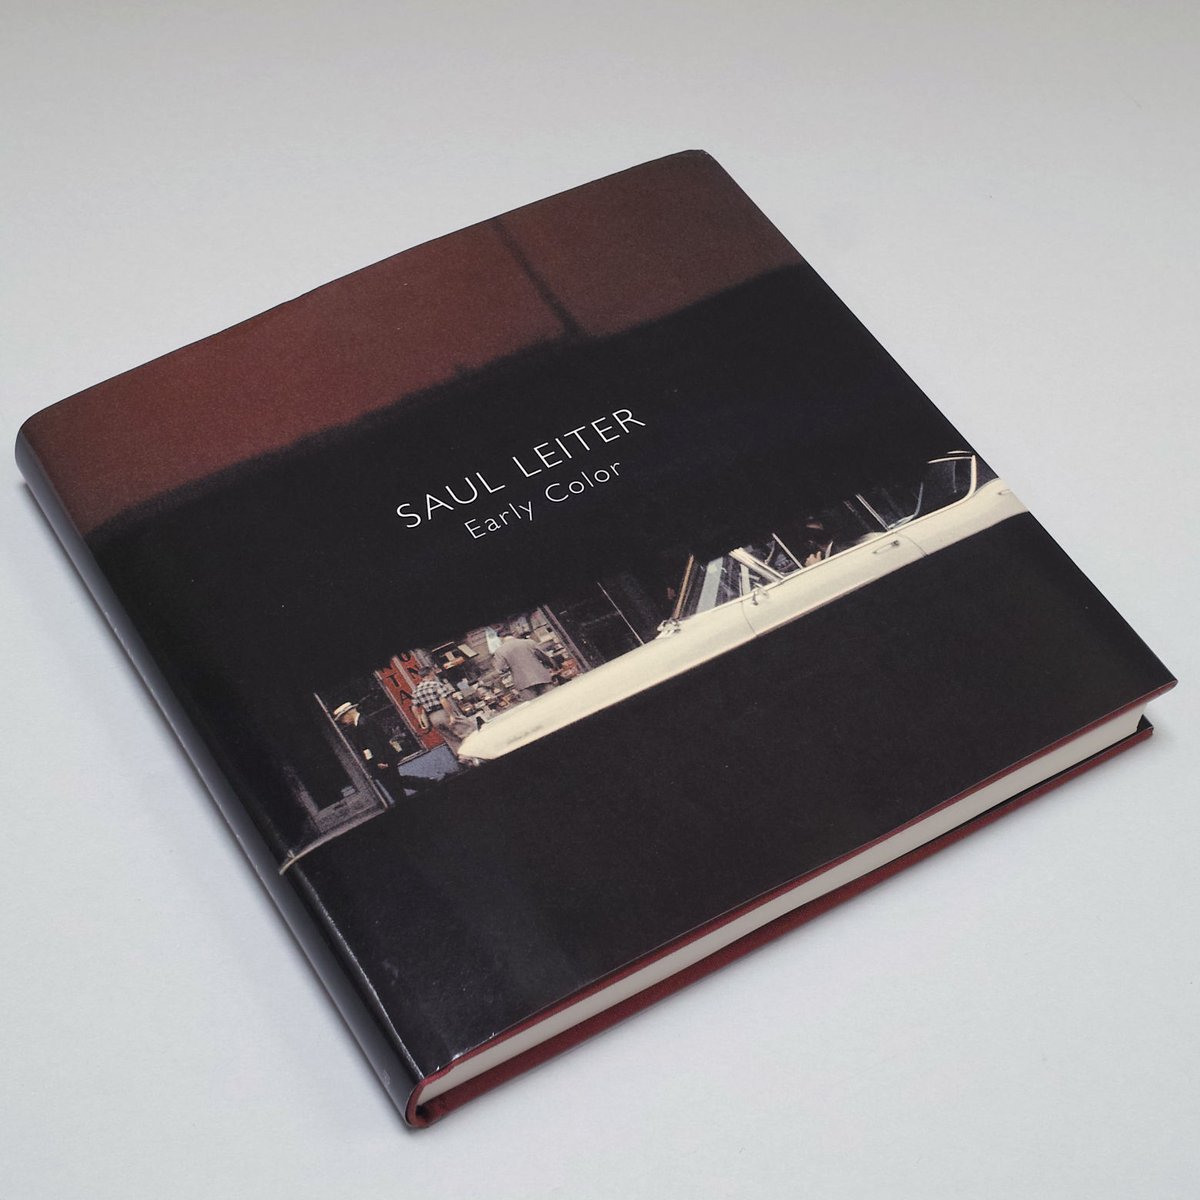 Last Copies】Saul Leiter / Early Color（フランス語版）